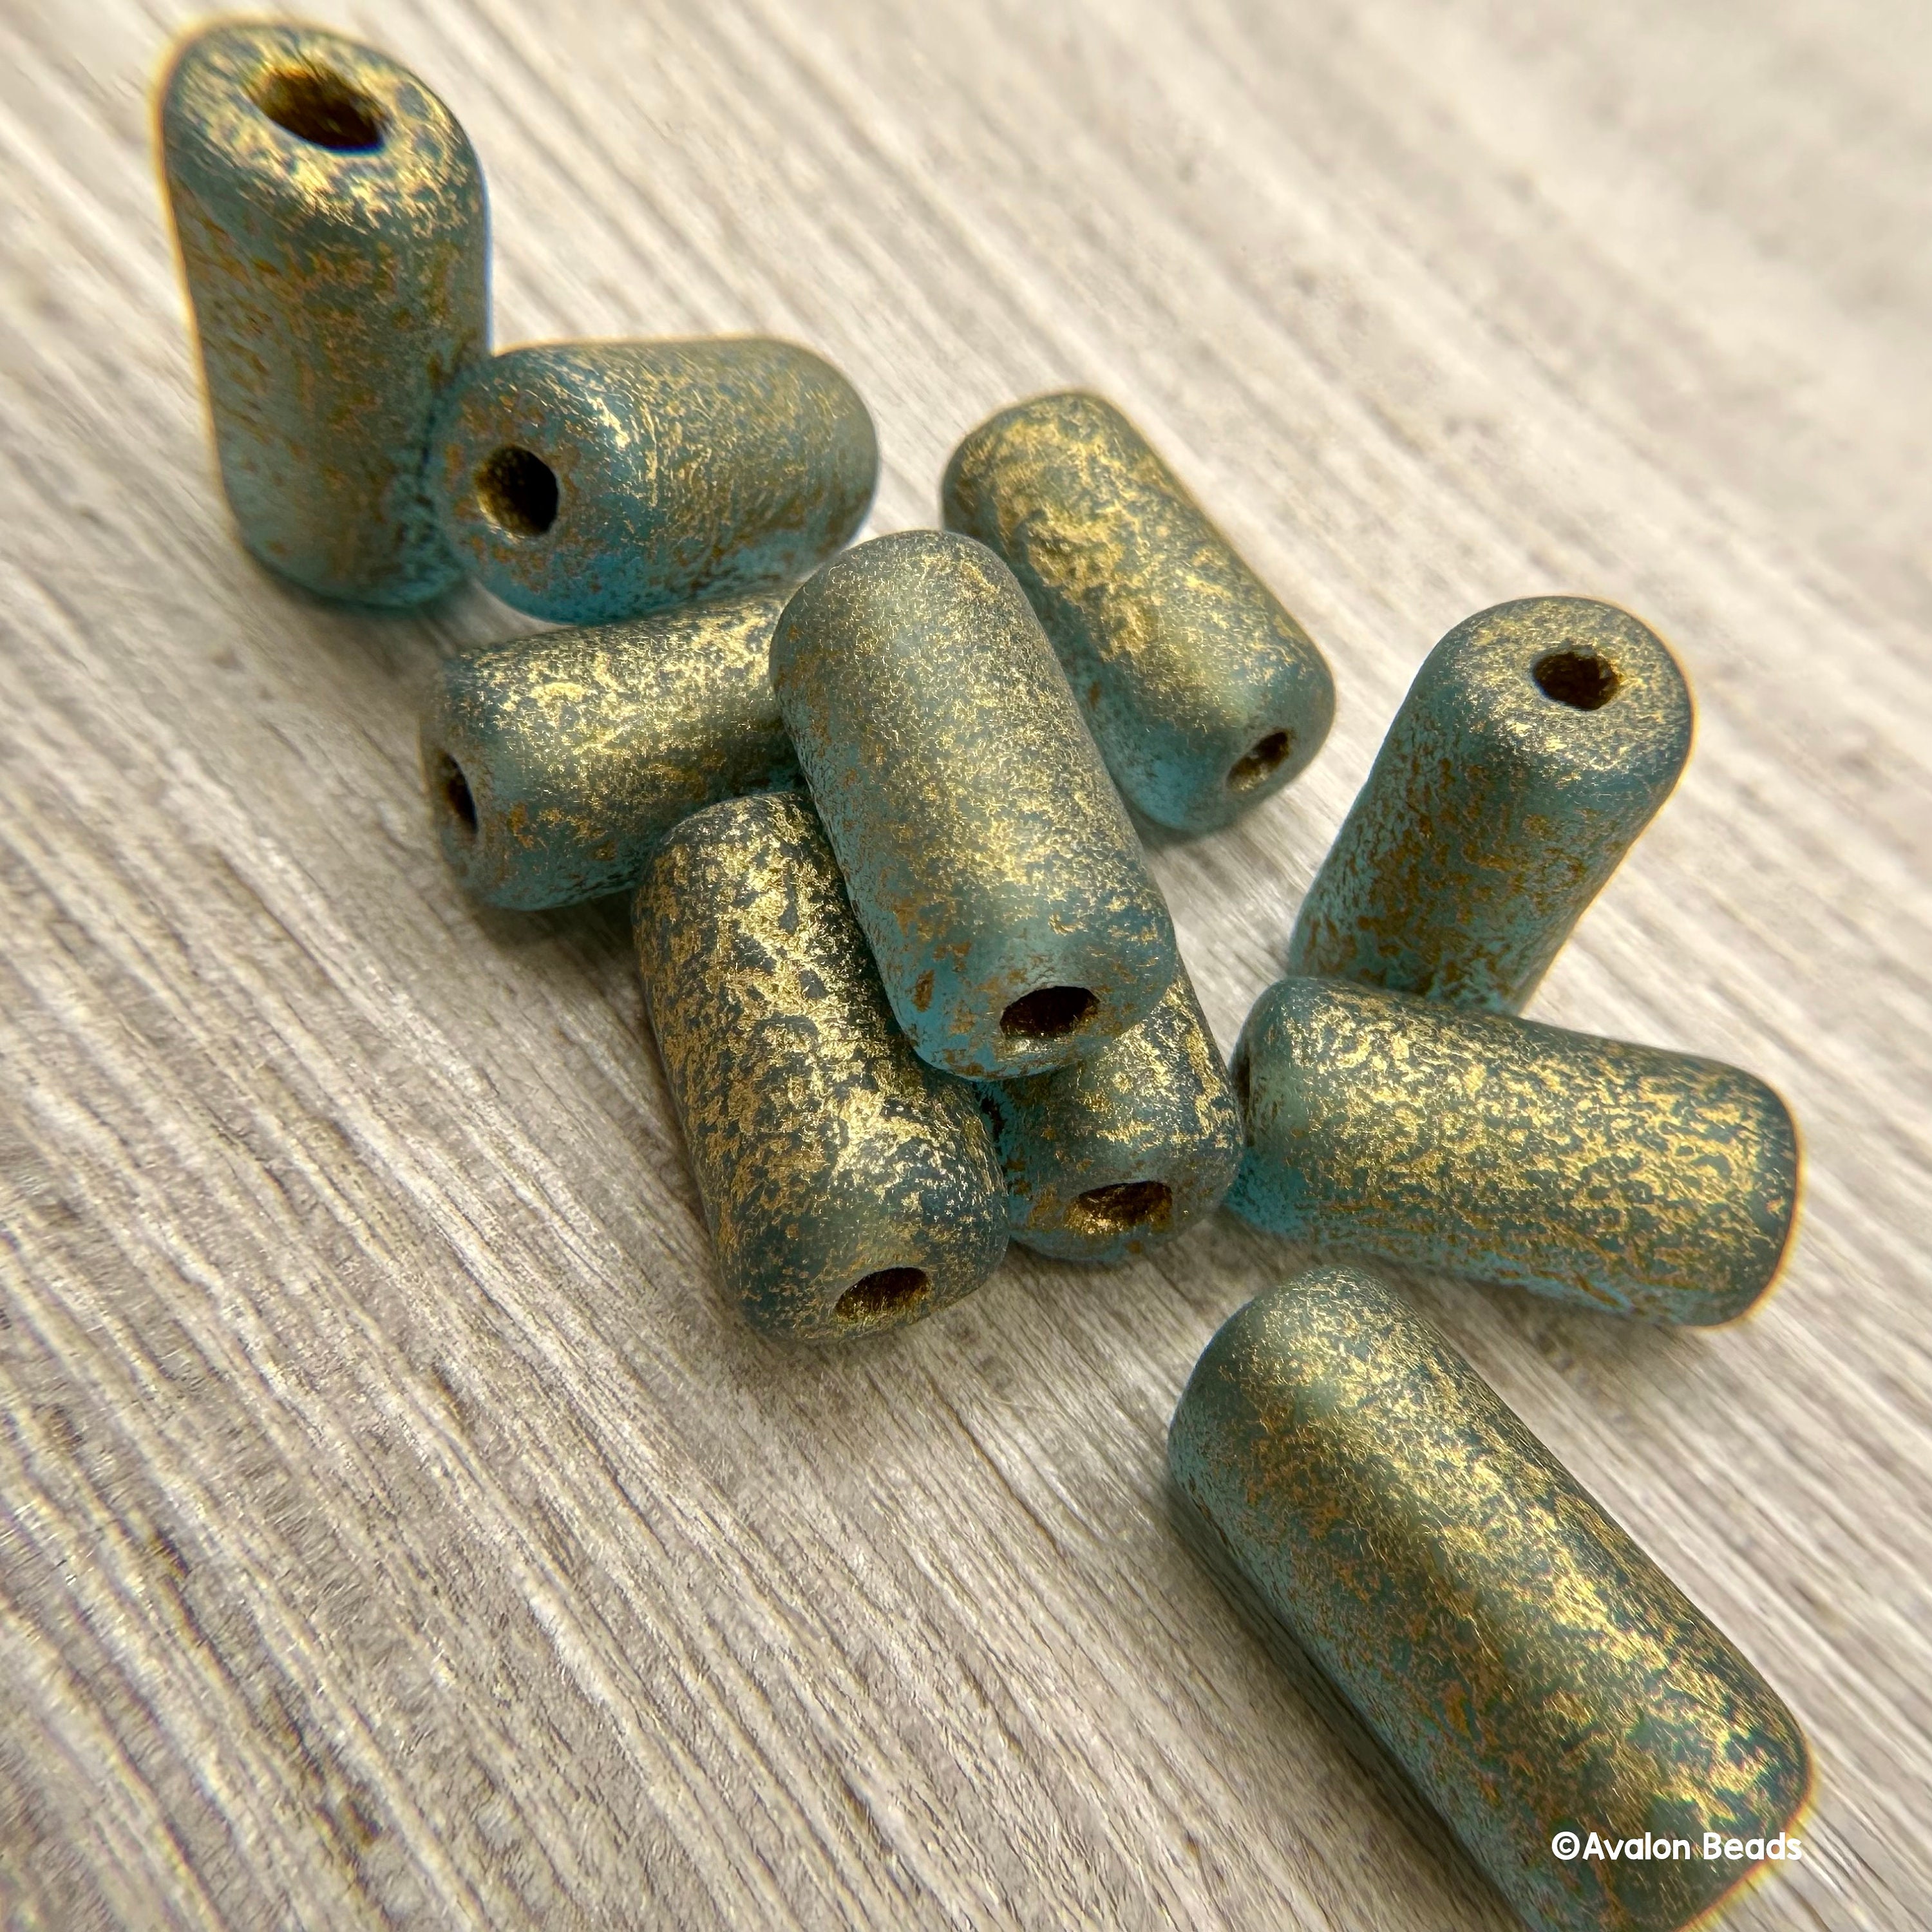 Large Hole Glass Beads, 7mm X 14mm Tube With 2.5mm Hole, Sky Blue With Gold  Finish, 10 Pieces 